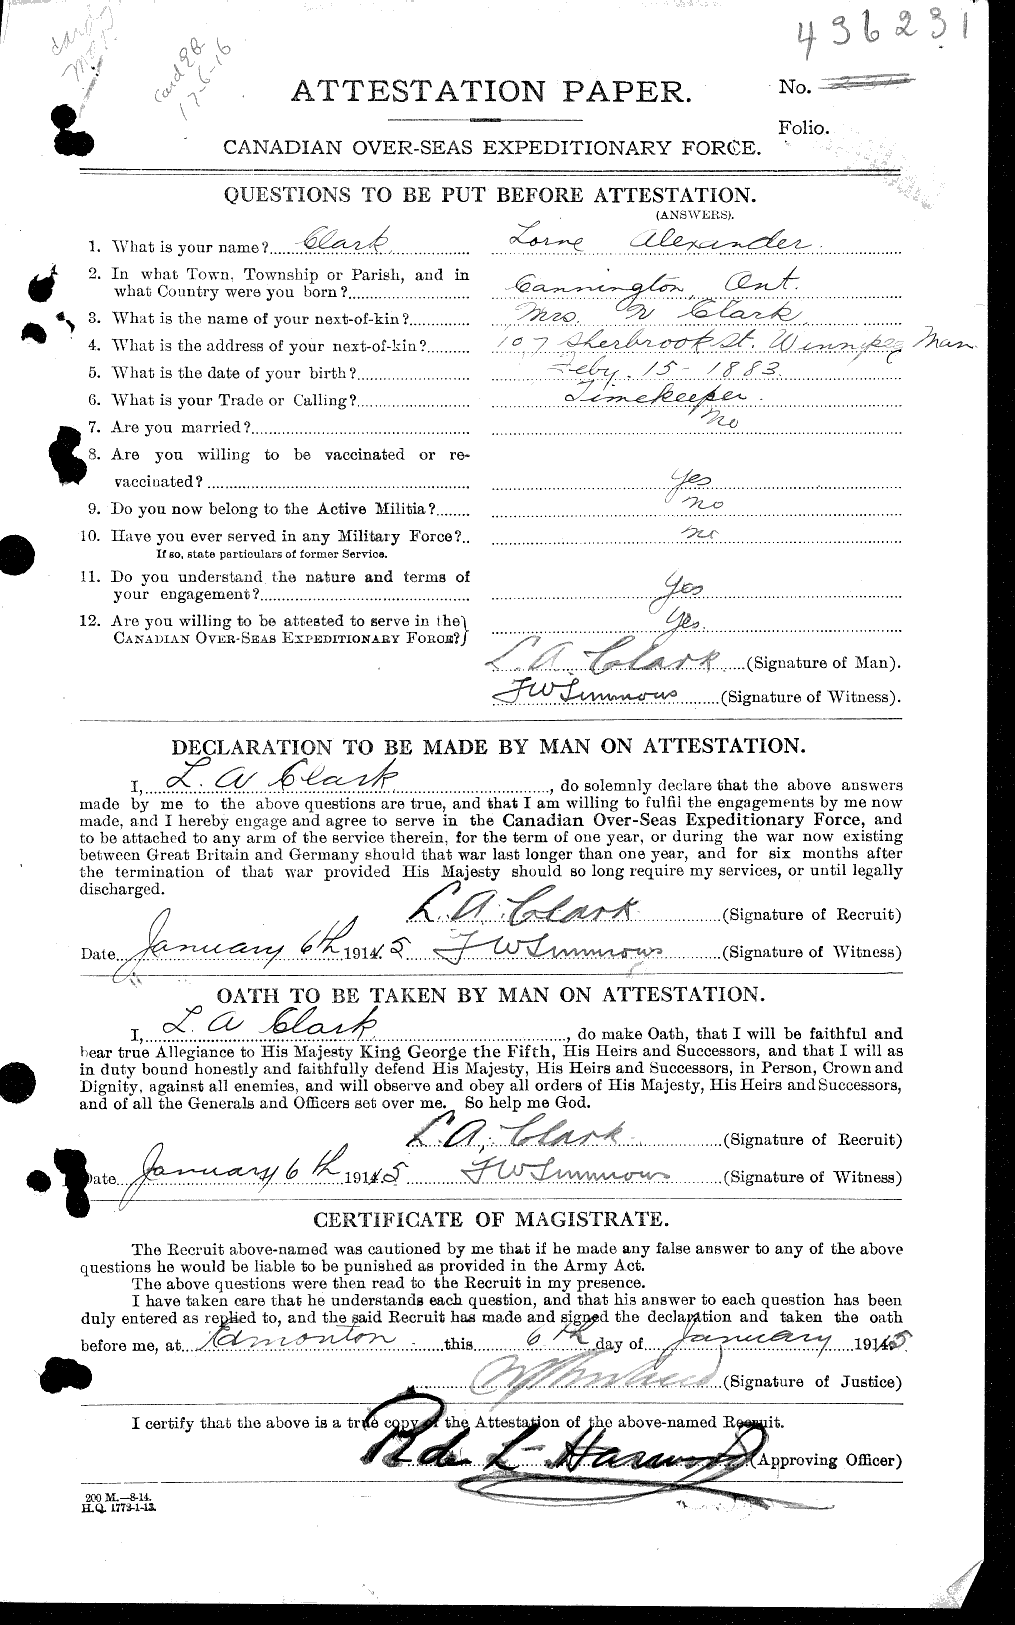 Personnel Records of the First World War - CEF 018633a